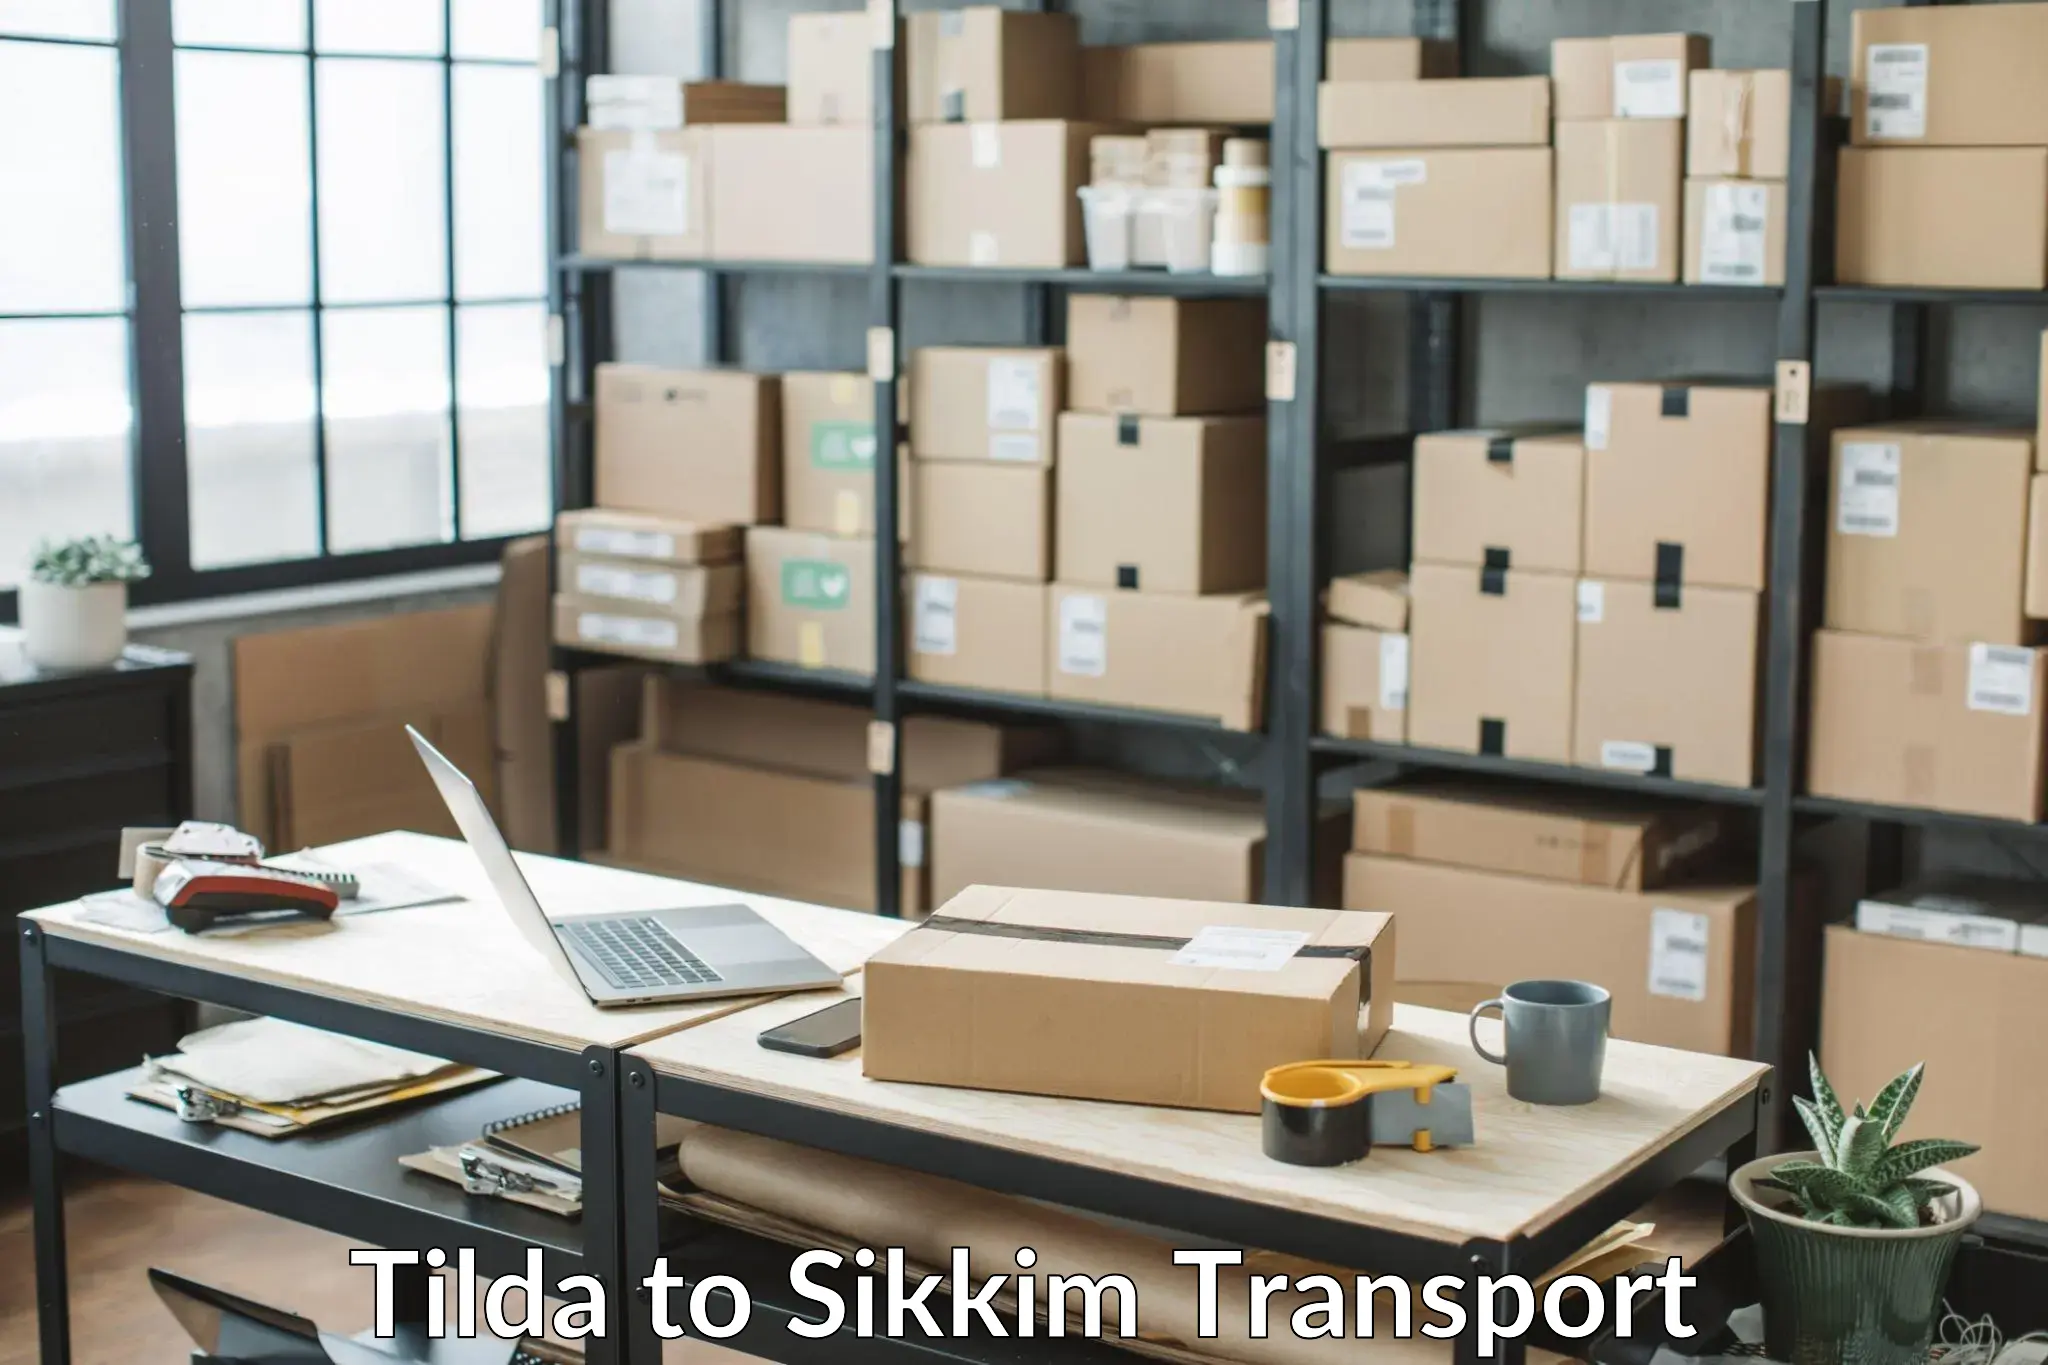 Delivery service Tilda to Sikkim